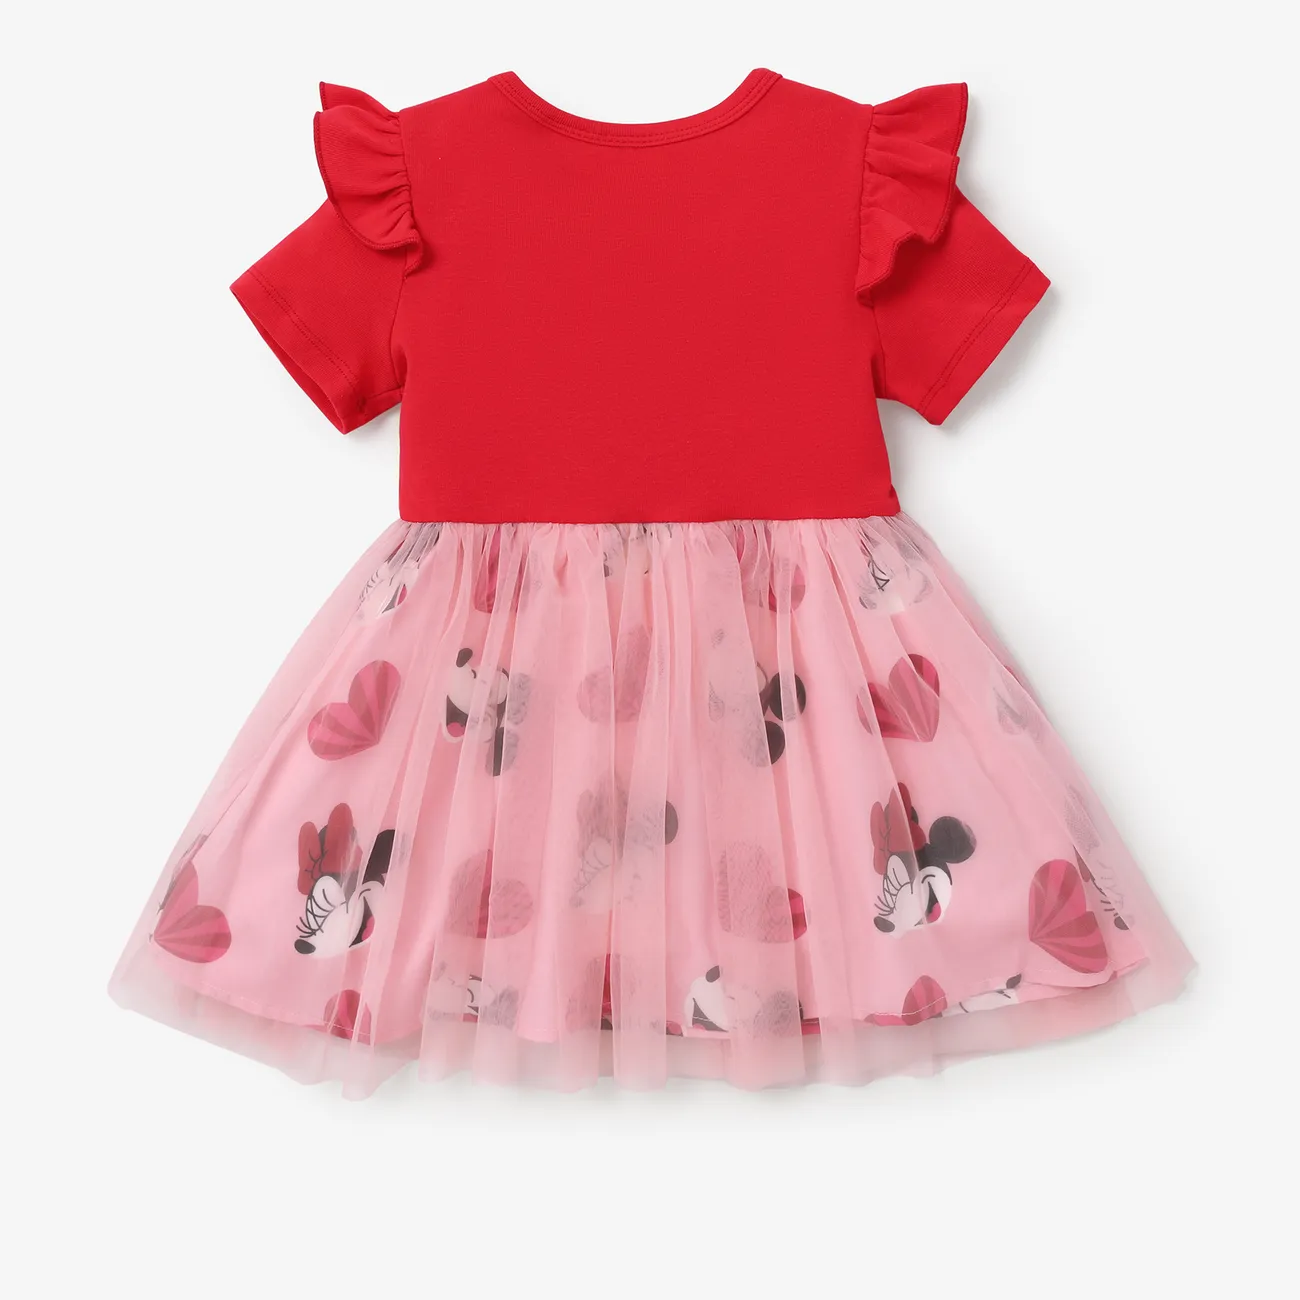 Disney Mickey and Friends Toddler Girls Mother's Day 1pc Character Print Tulle Dress Red big image 1